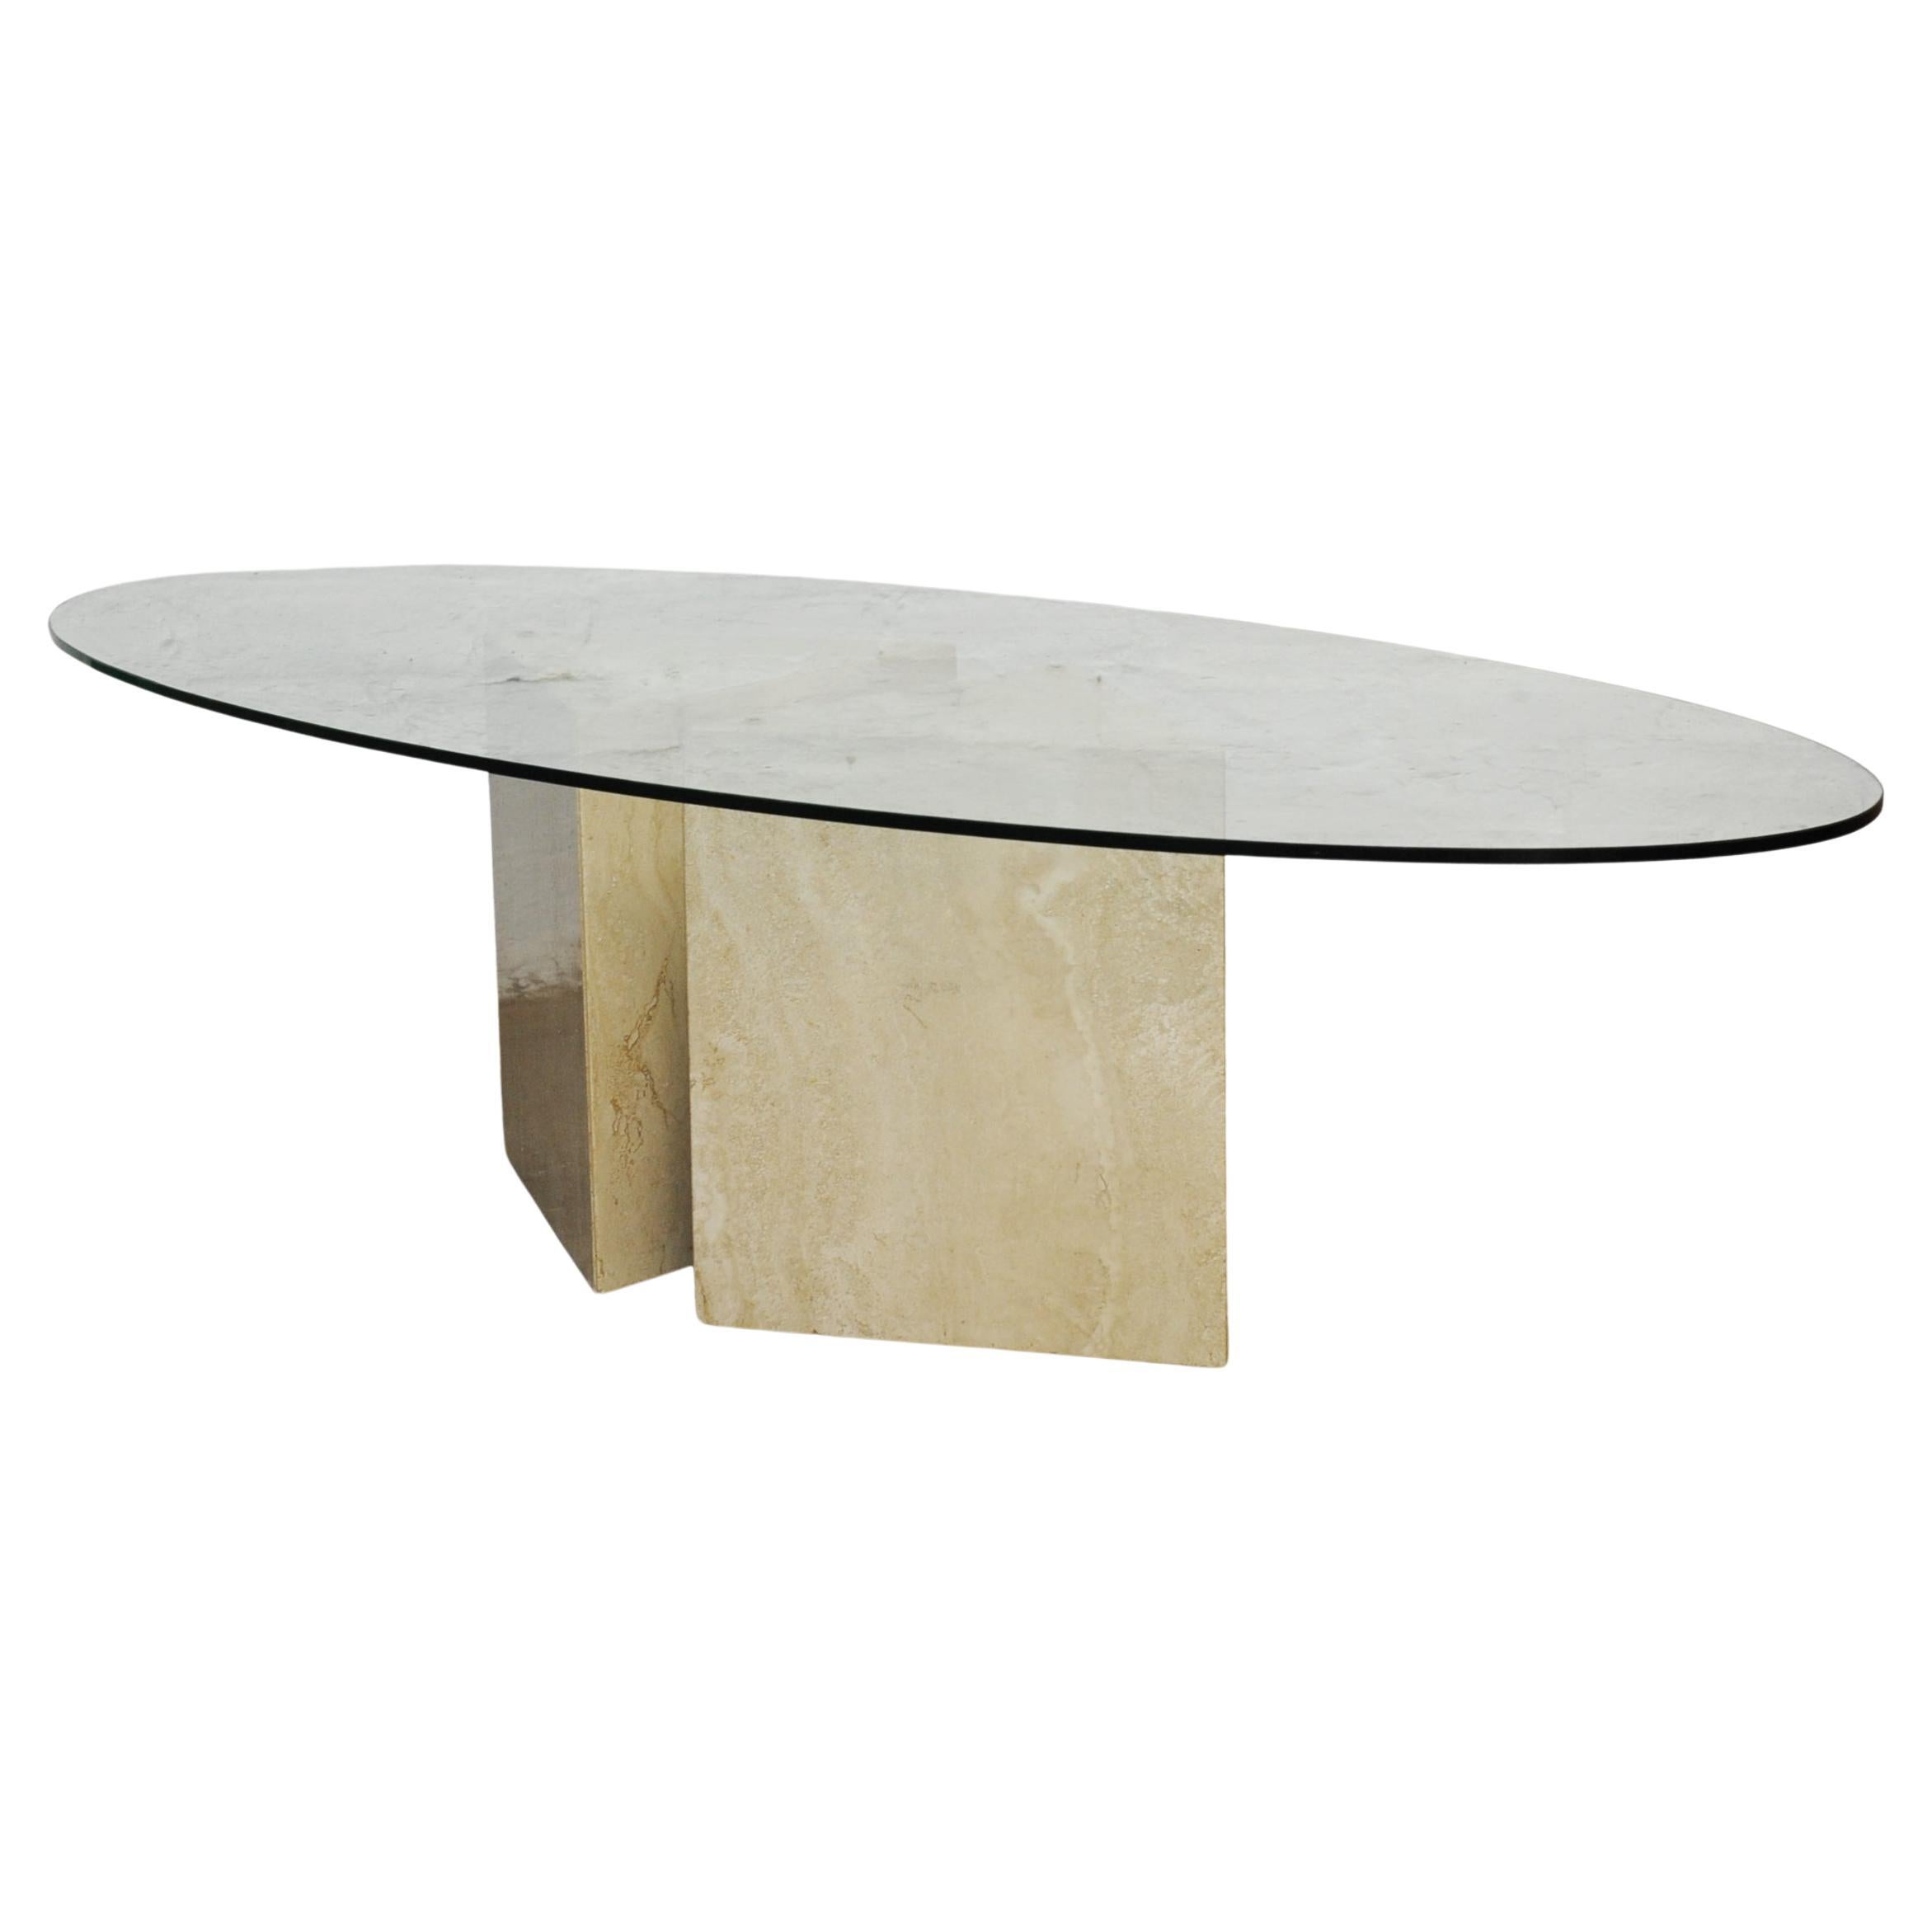 Glass topped Oval Coffee Table on a Travertine and Brass Base, 1980s